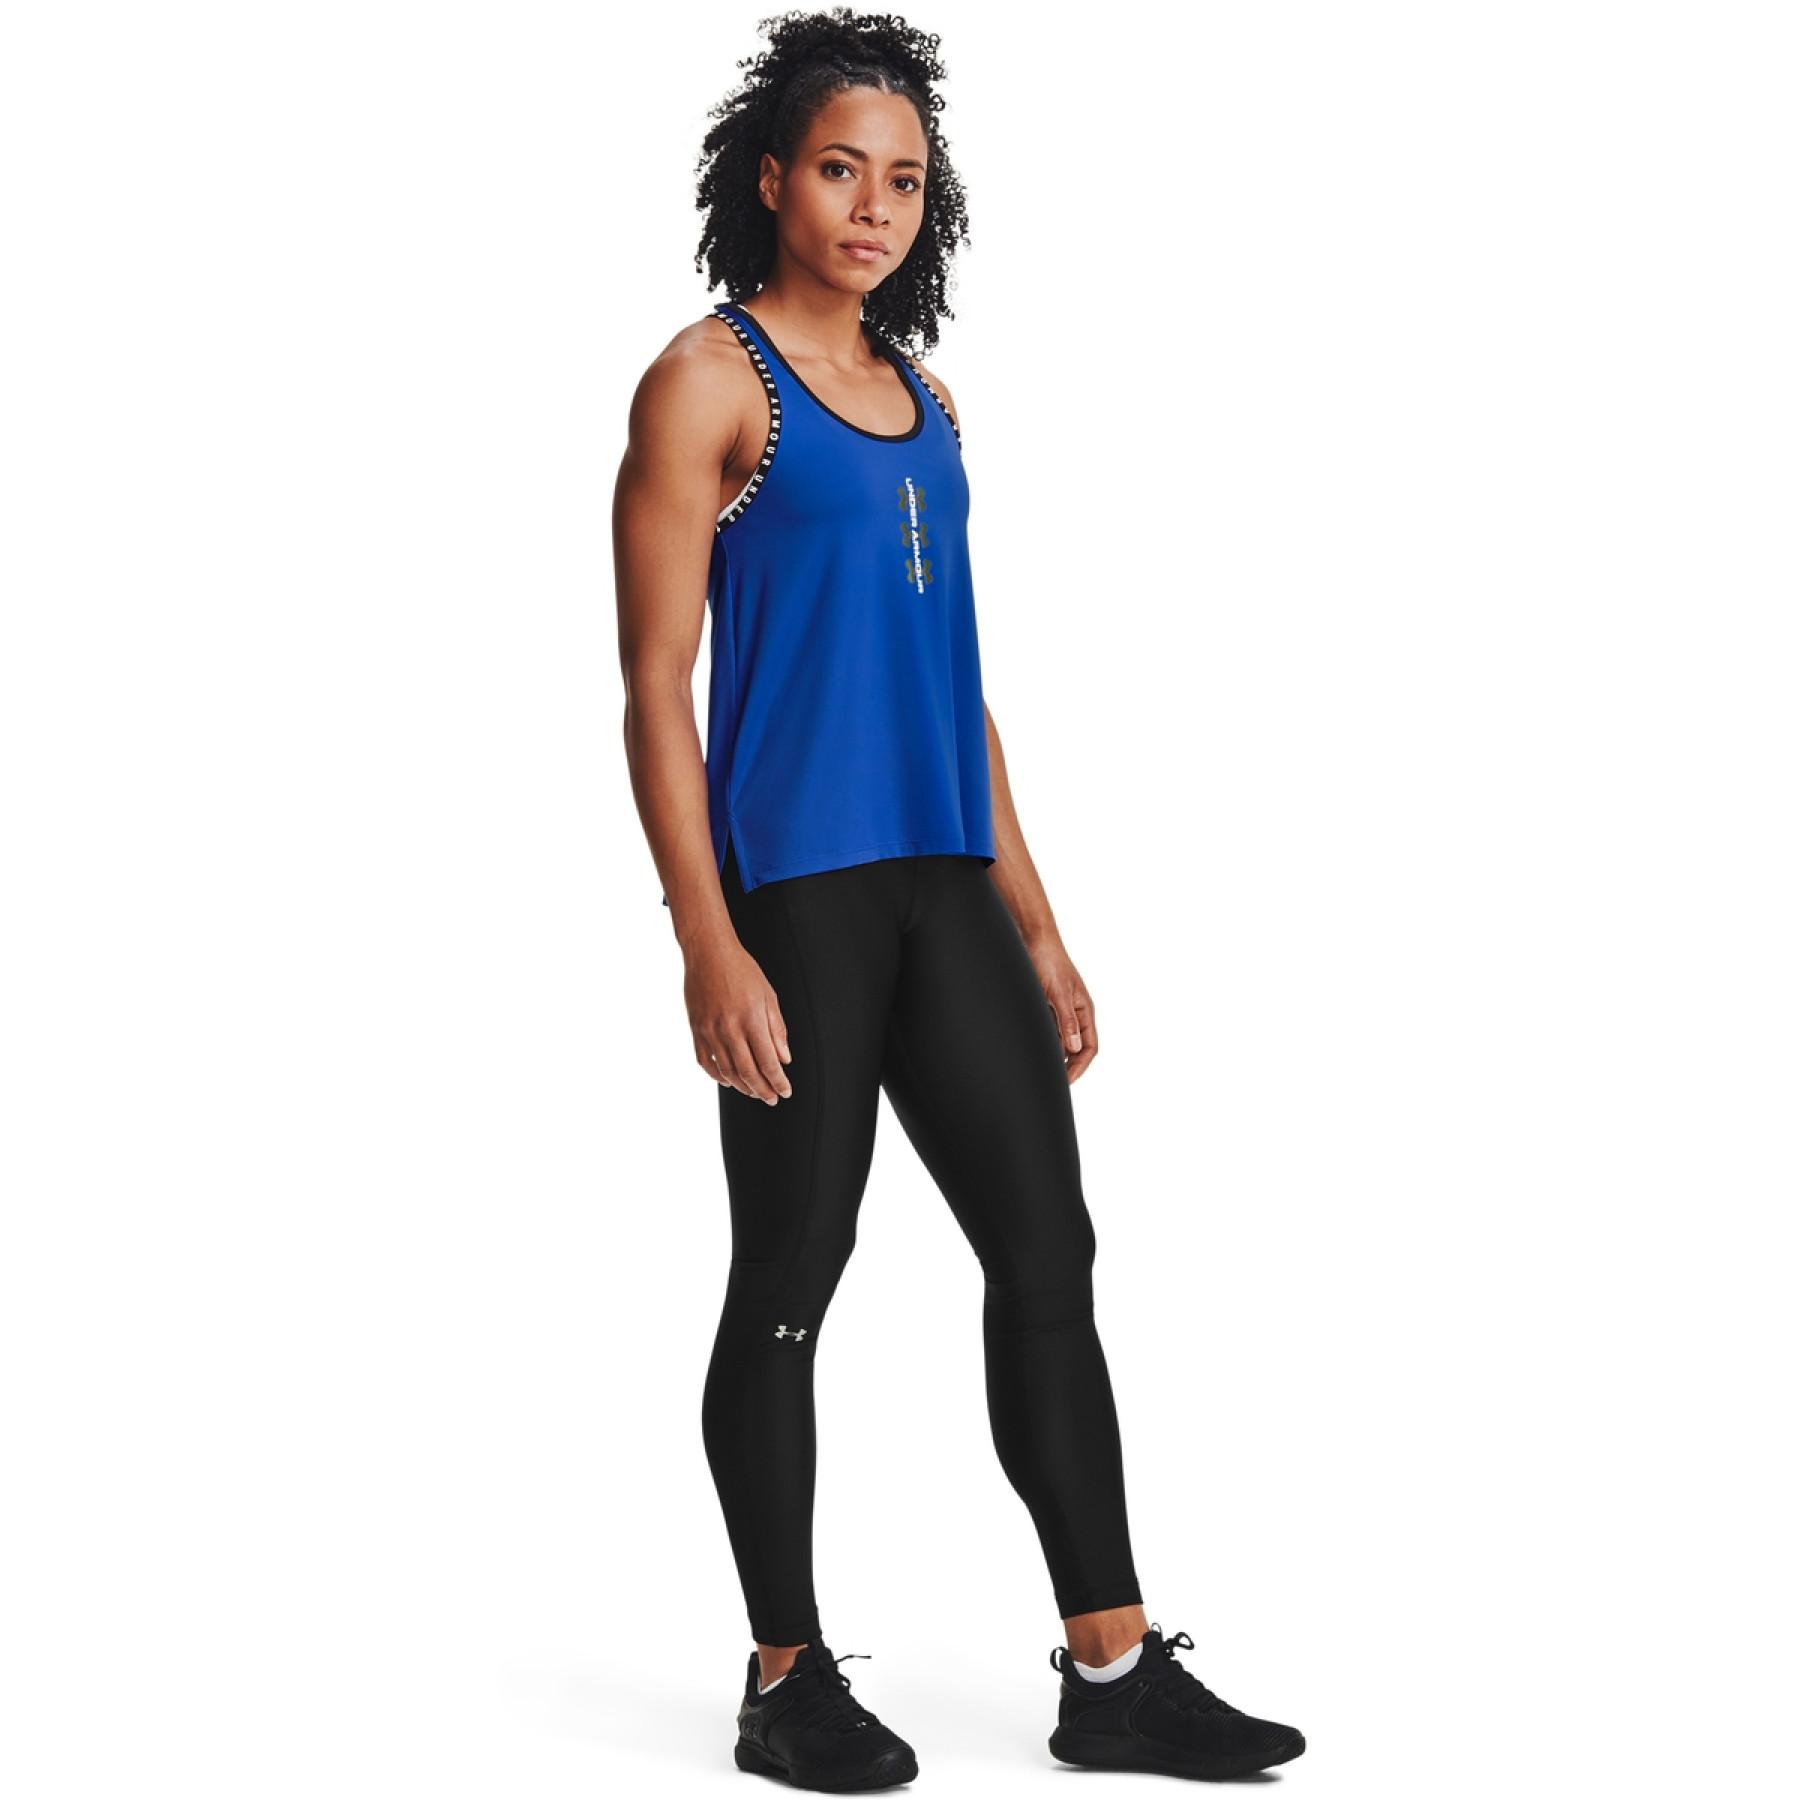 Women's tank top Under Armour Knockout amp